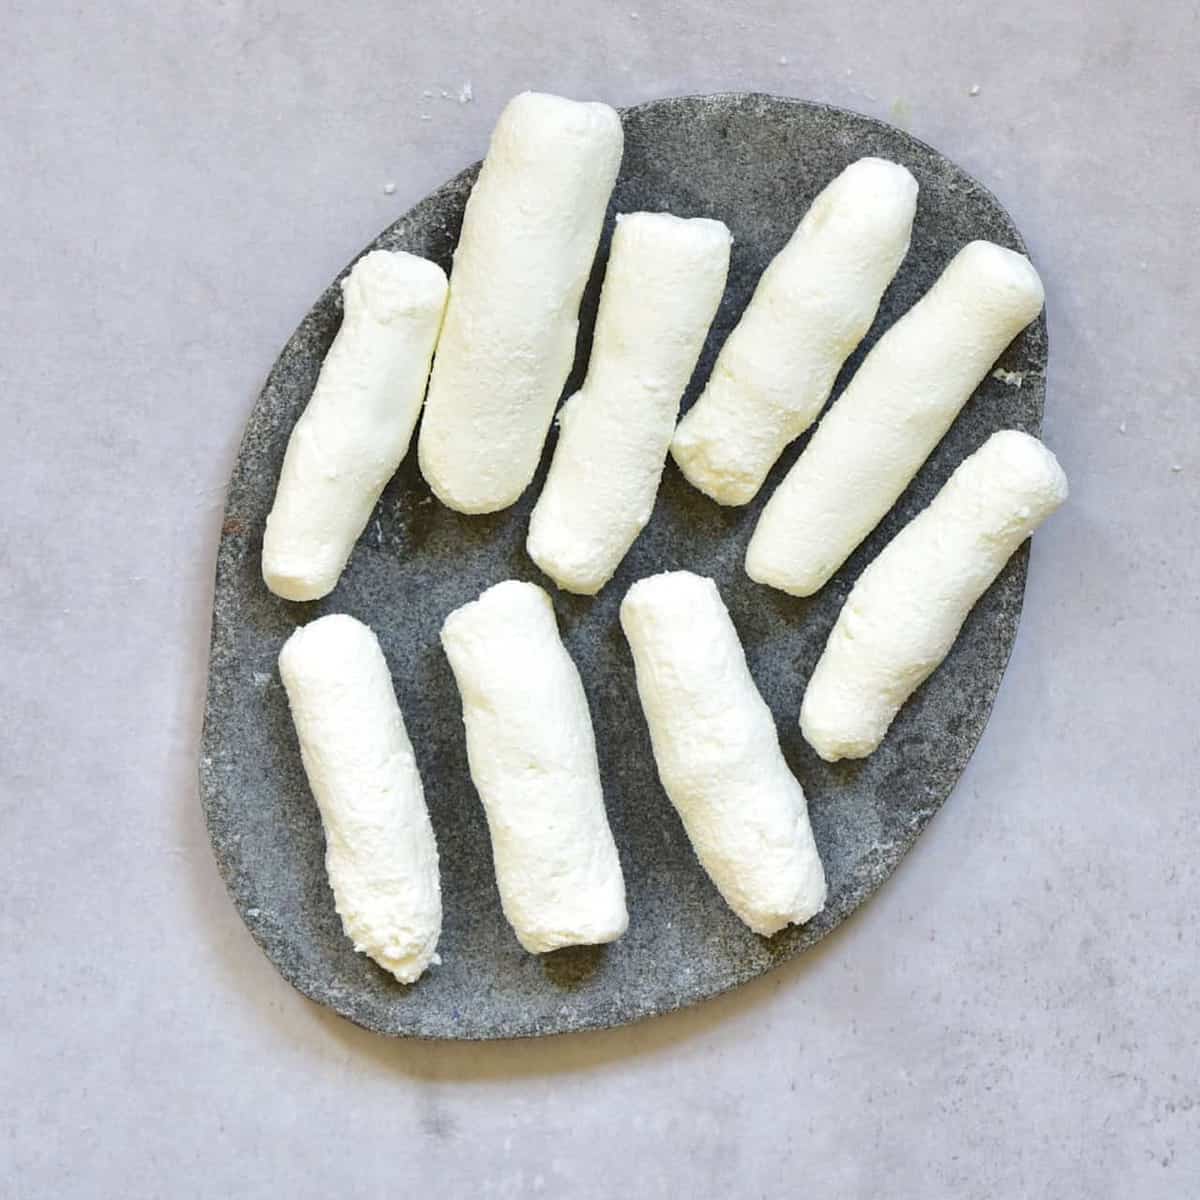 Goat cheese rolls in a plate